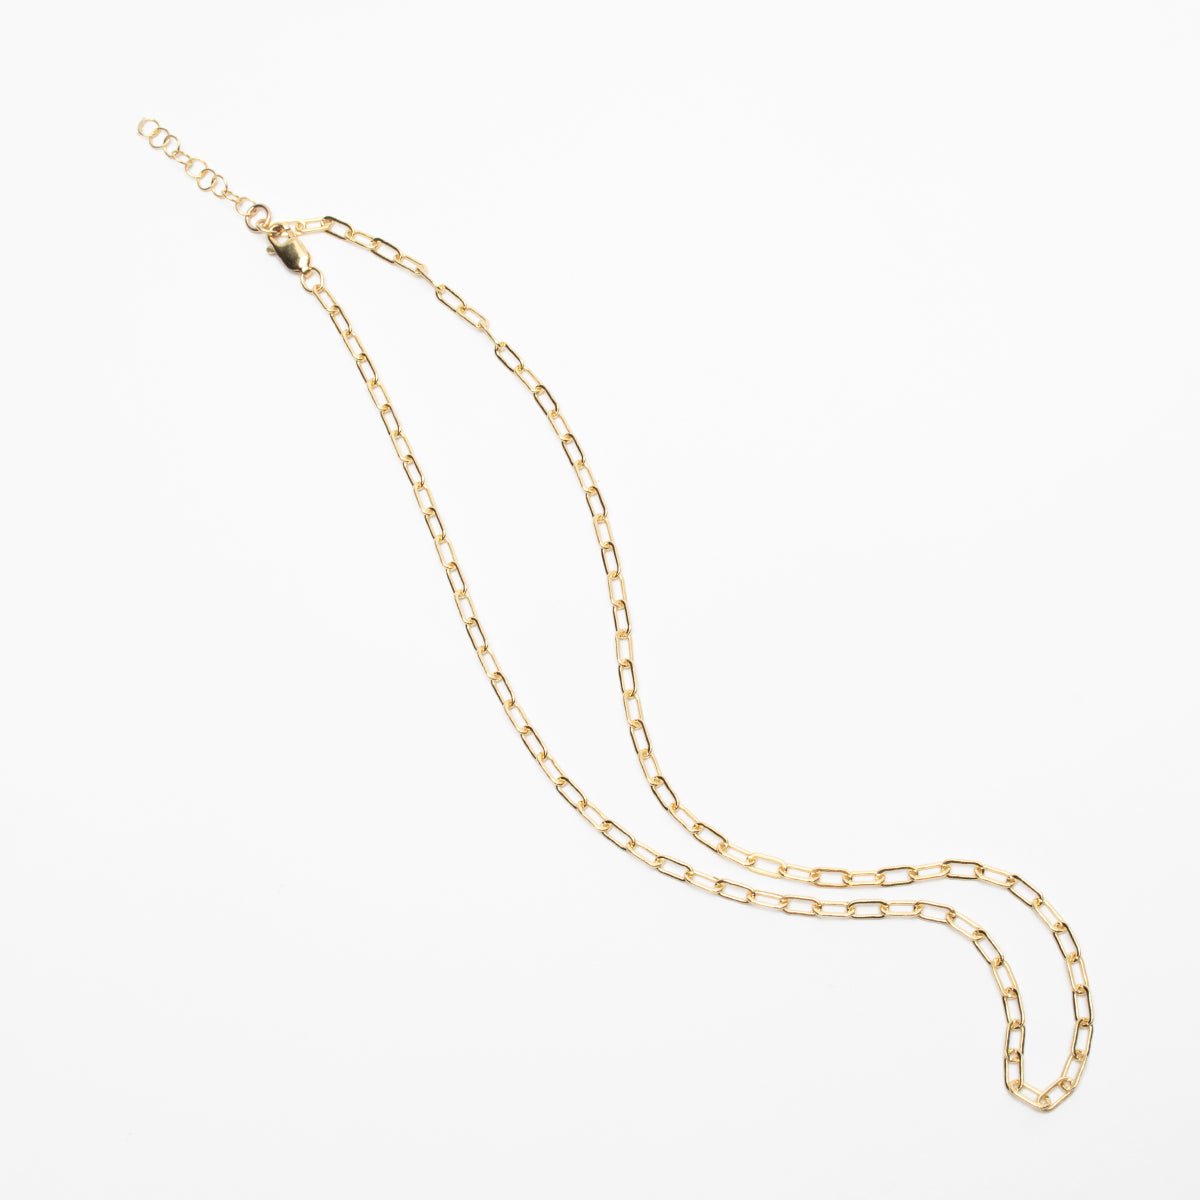 A chain link gold-fill choker style necklace. The Gold-fill Oval Layering Choker is designed and handcrafted by Deivi Arts Collective in Vancouver, Canada.